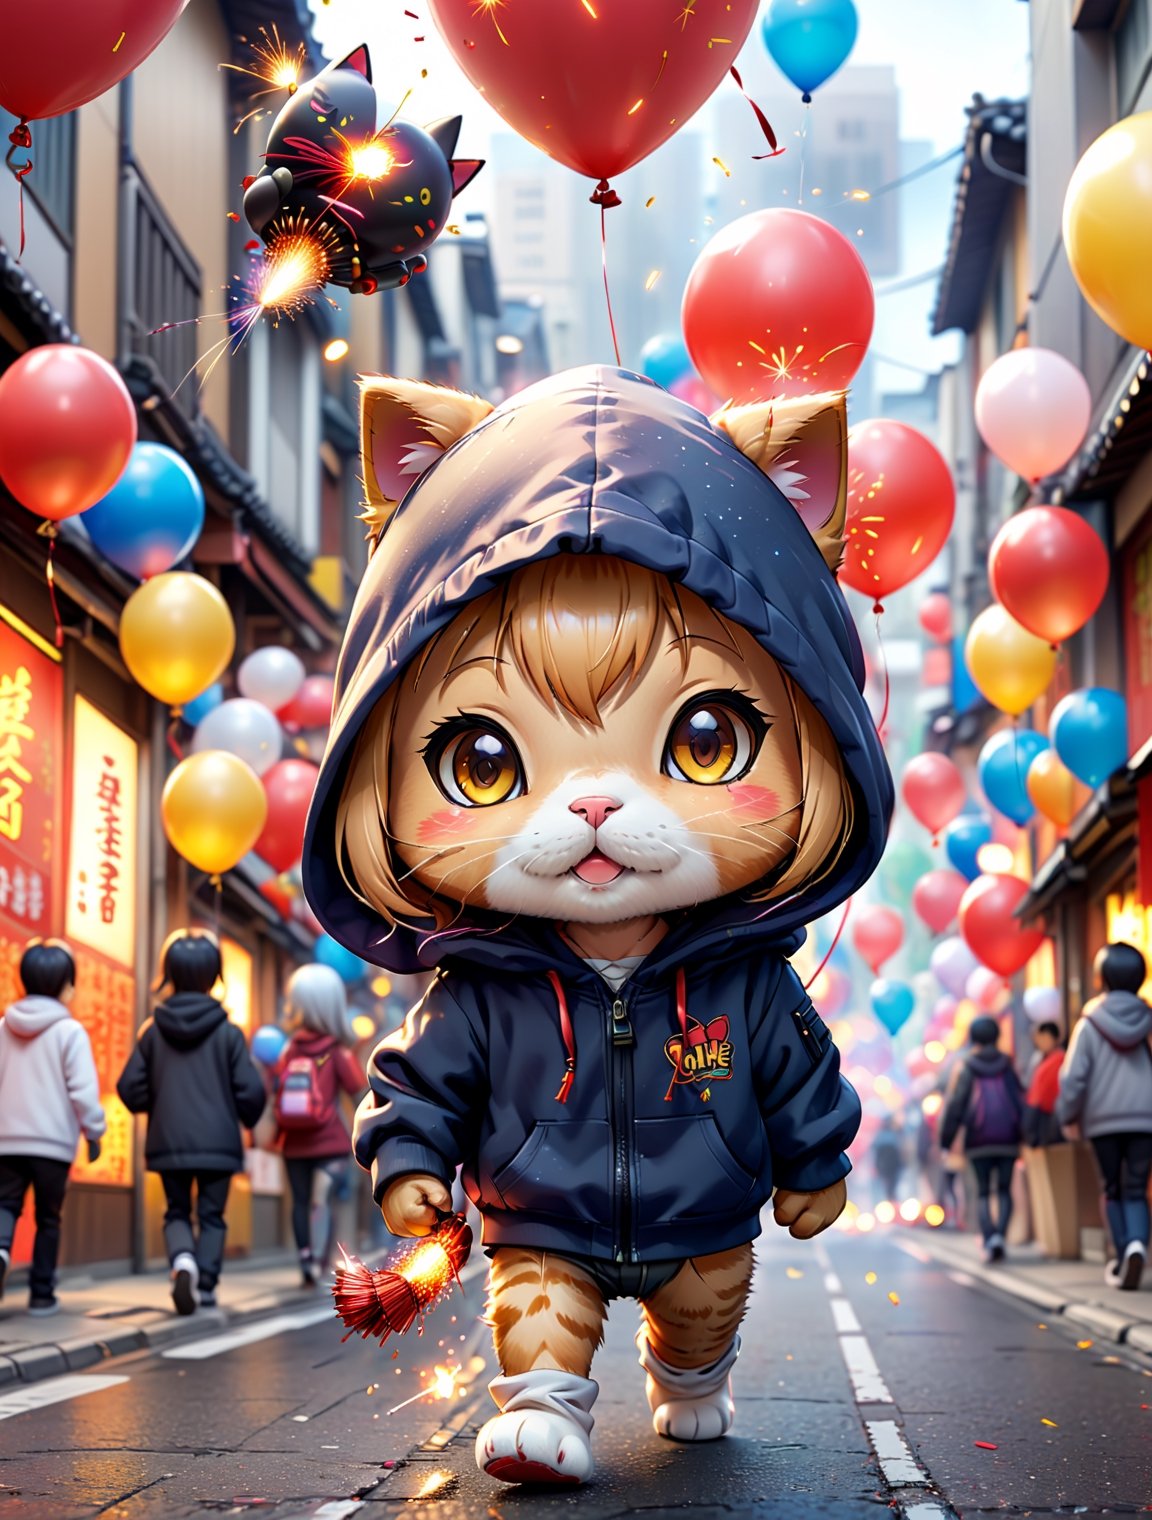 ((anime chibi style)), chibi cat in hoodie walking on busy street, new year setting, balloon and firecrackers, dynamic angle, depth of field, detail XL, closeup shot, (anime),realistic,finetune